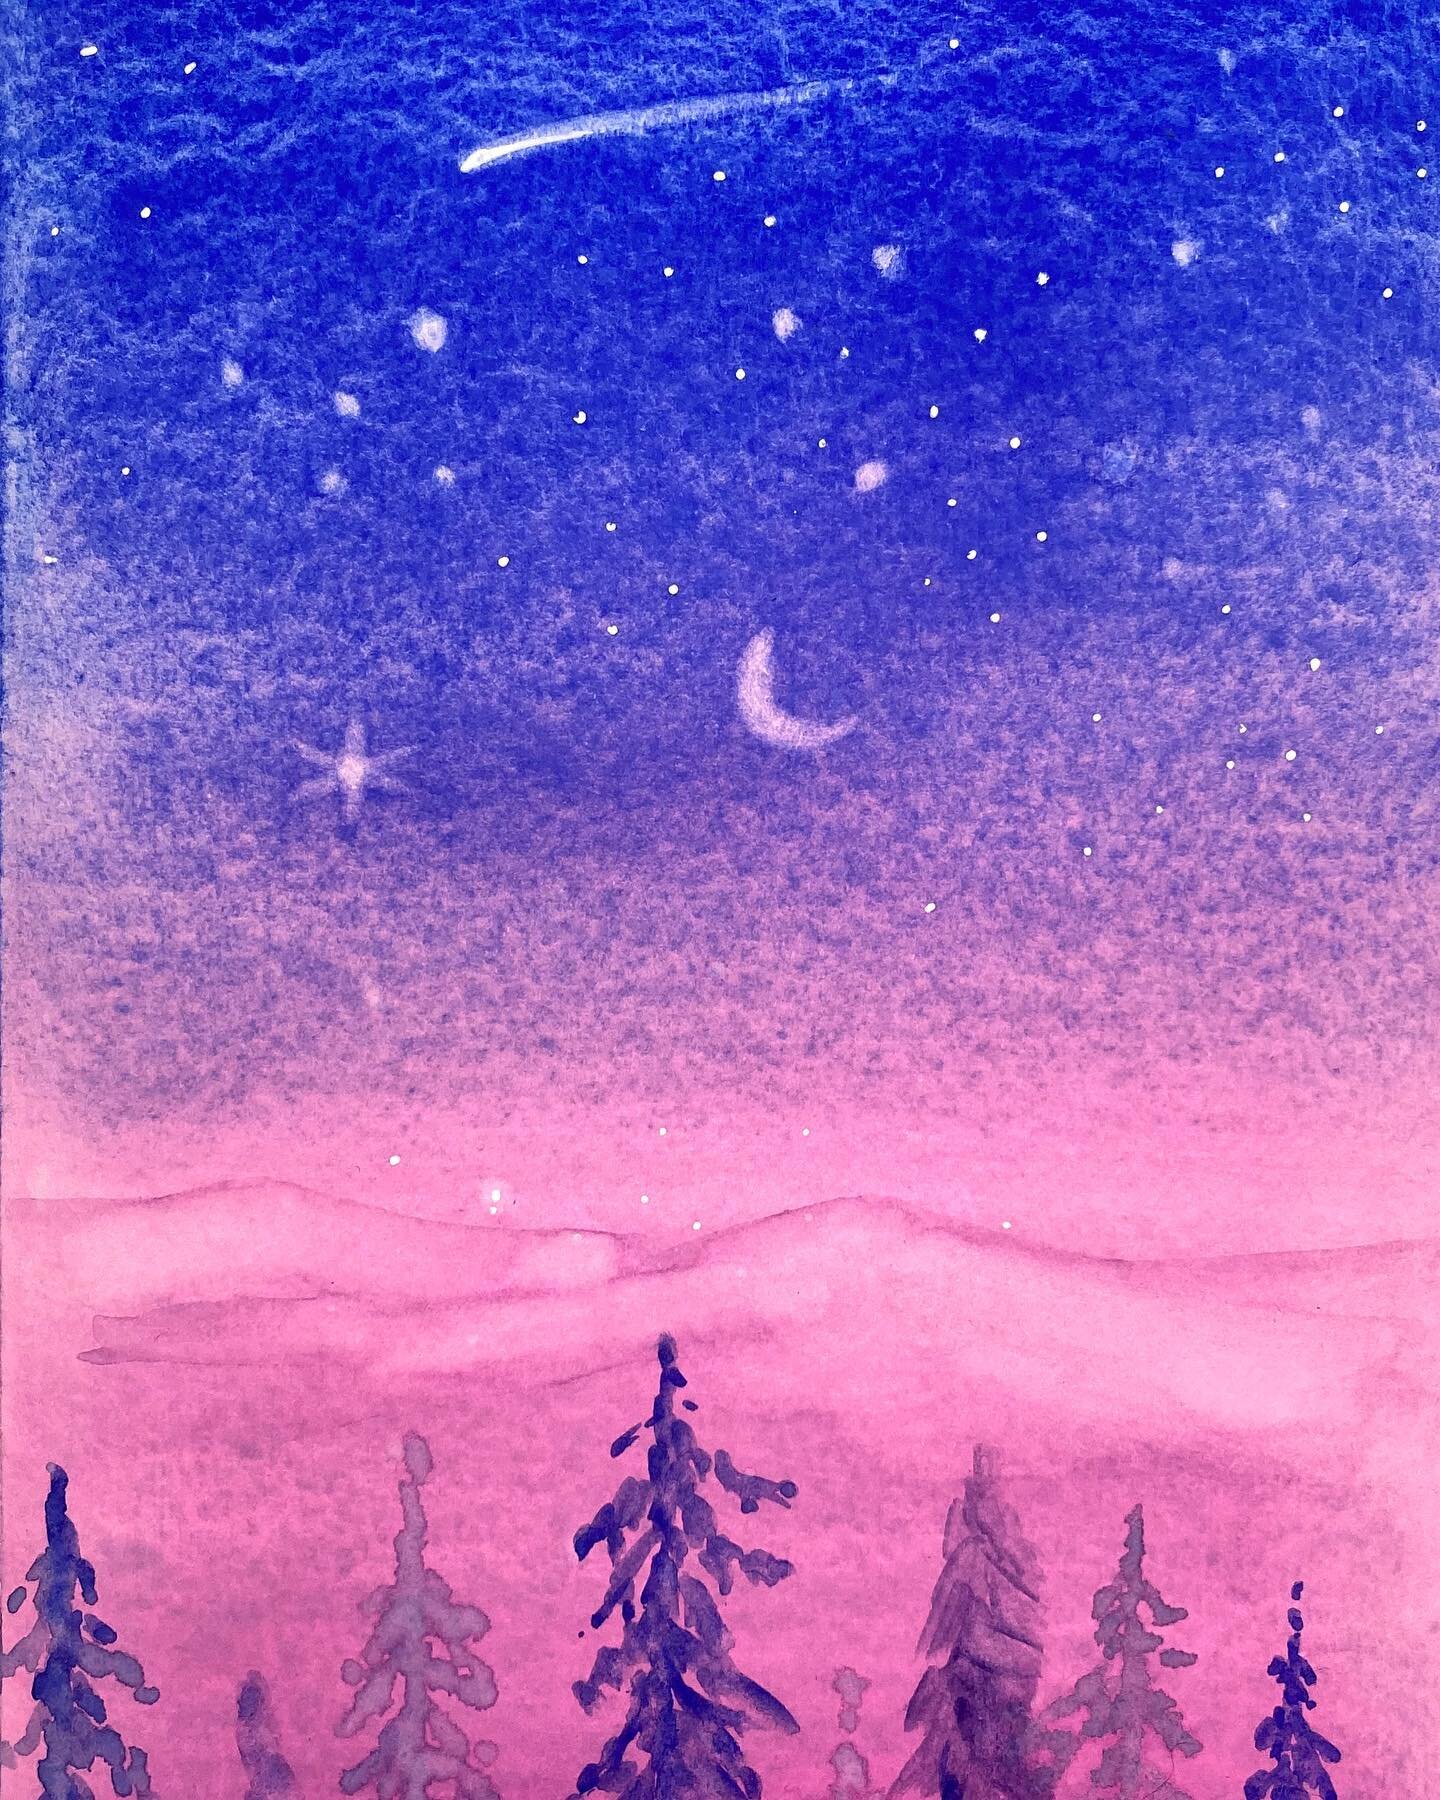 This is the night scene in watercolor showed to our beginner watercolor young students. Message us if you are interested in taking watercolor class with us!! 😀😀😀😀
#charlotteartist #watercolor #charlotteartstudio #parents #art #fineart #creativity